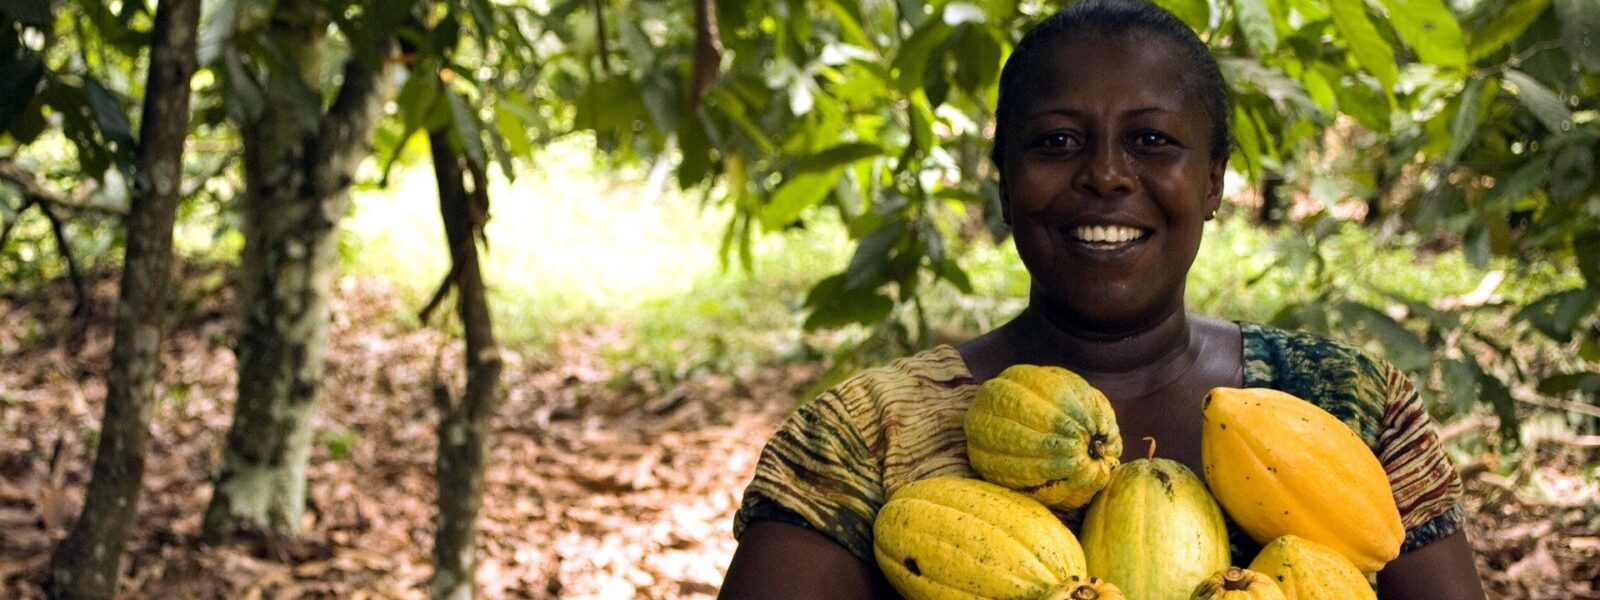 Female farmer smiling while holding a bunch of cocoa fruits